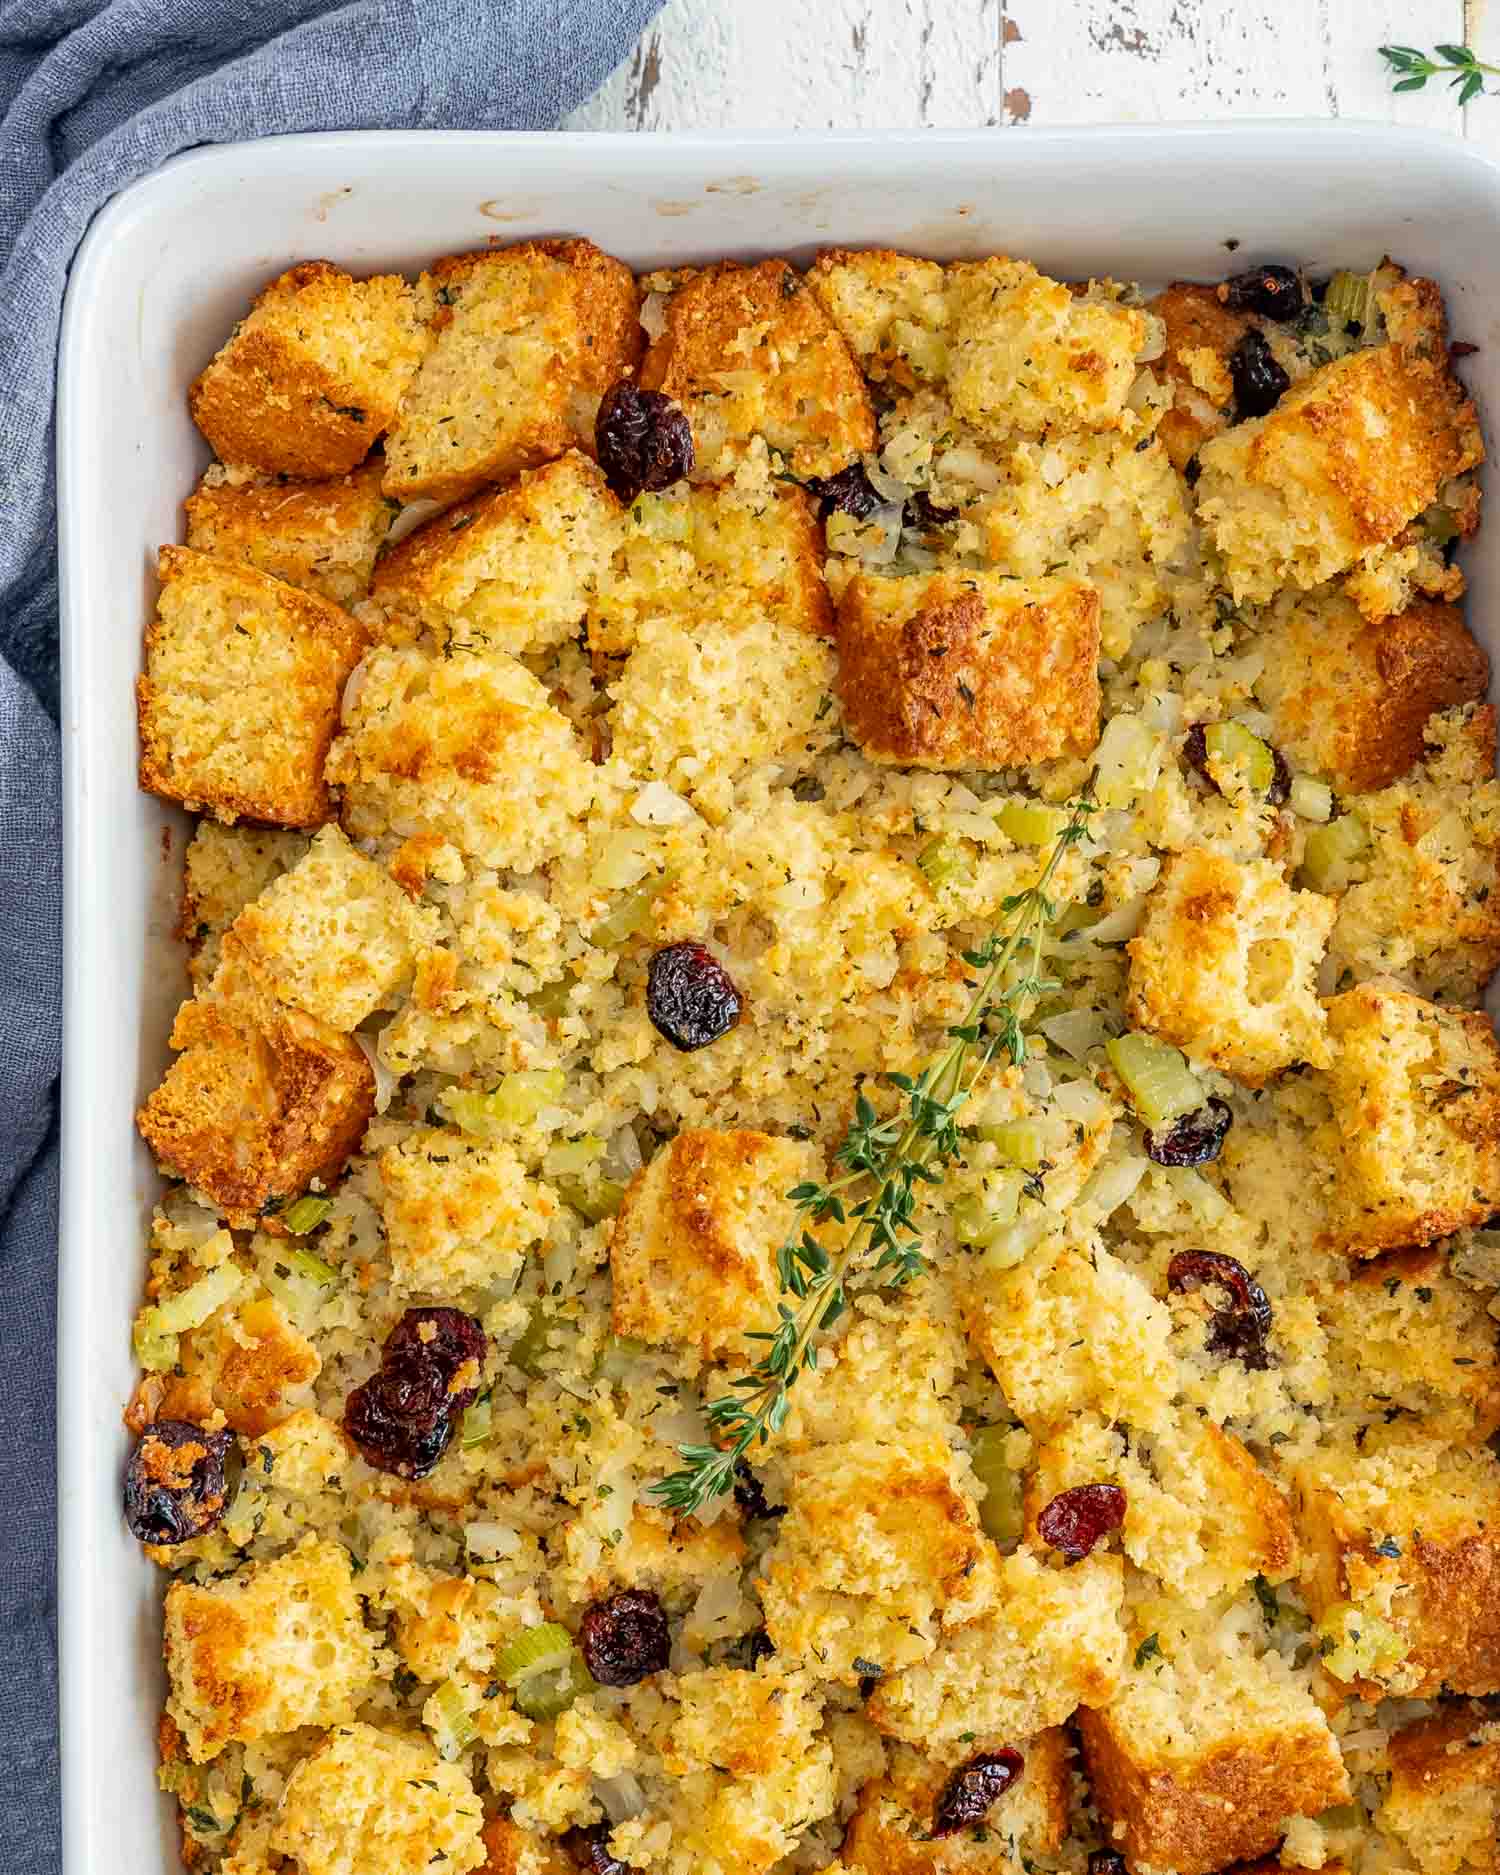 freshly baked cornbread stuffing in a white casserole dish.